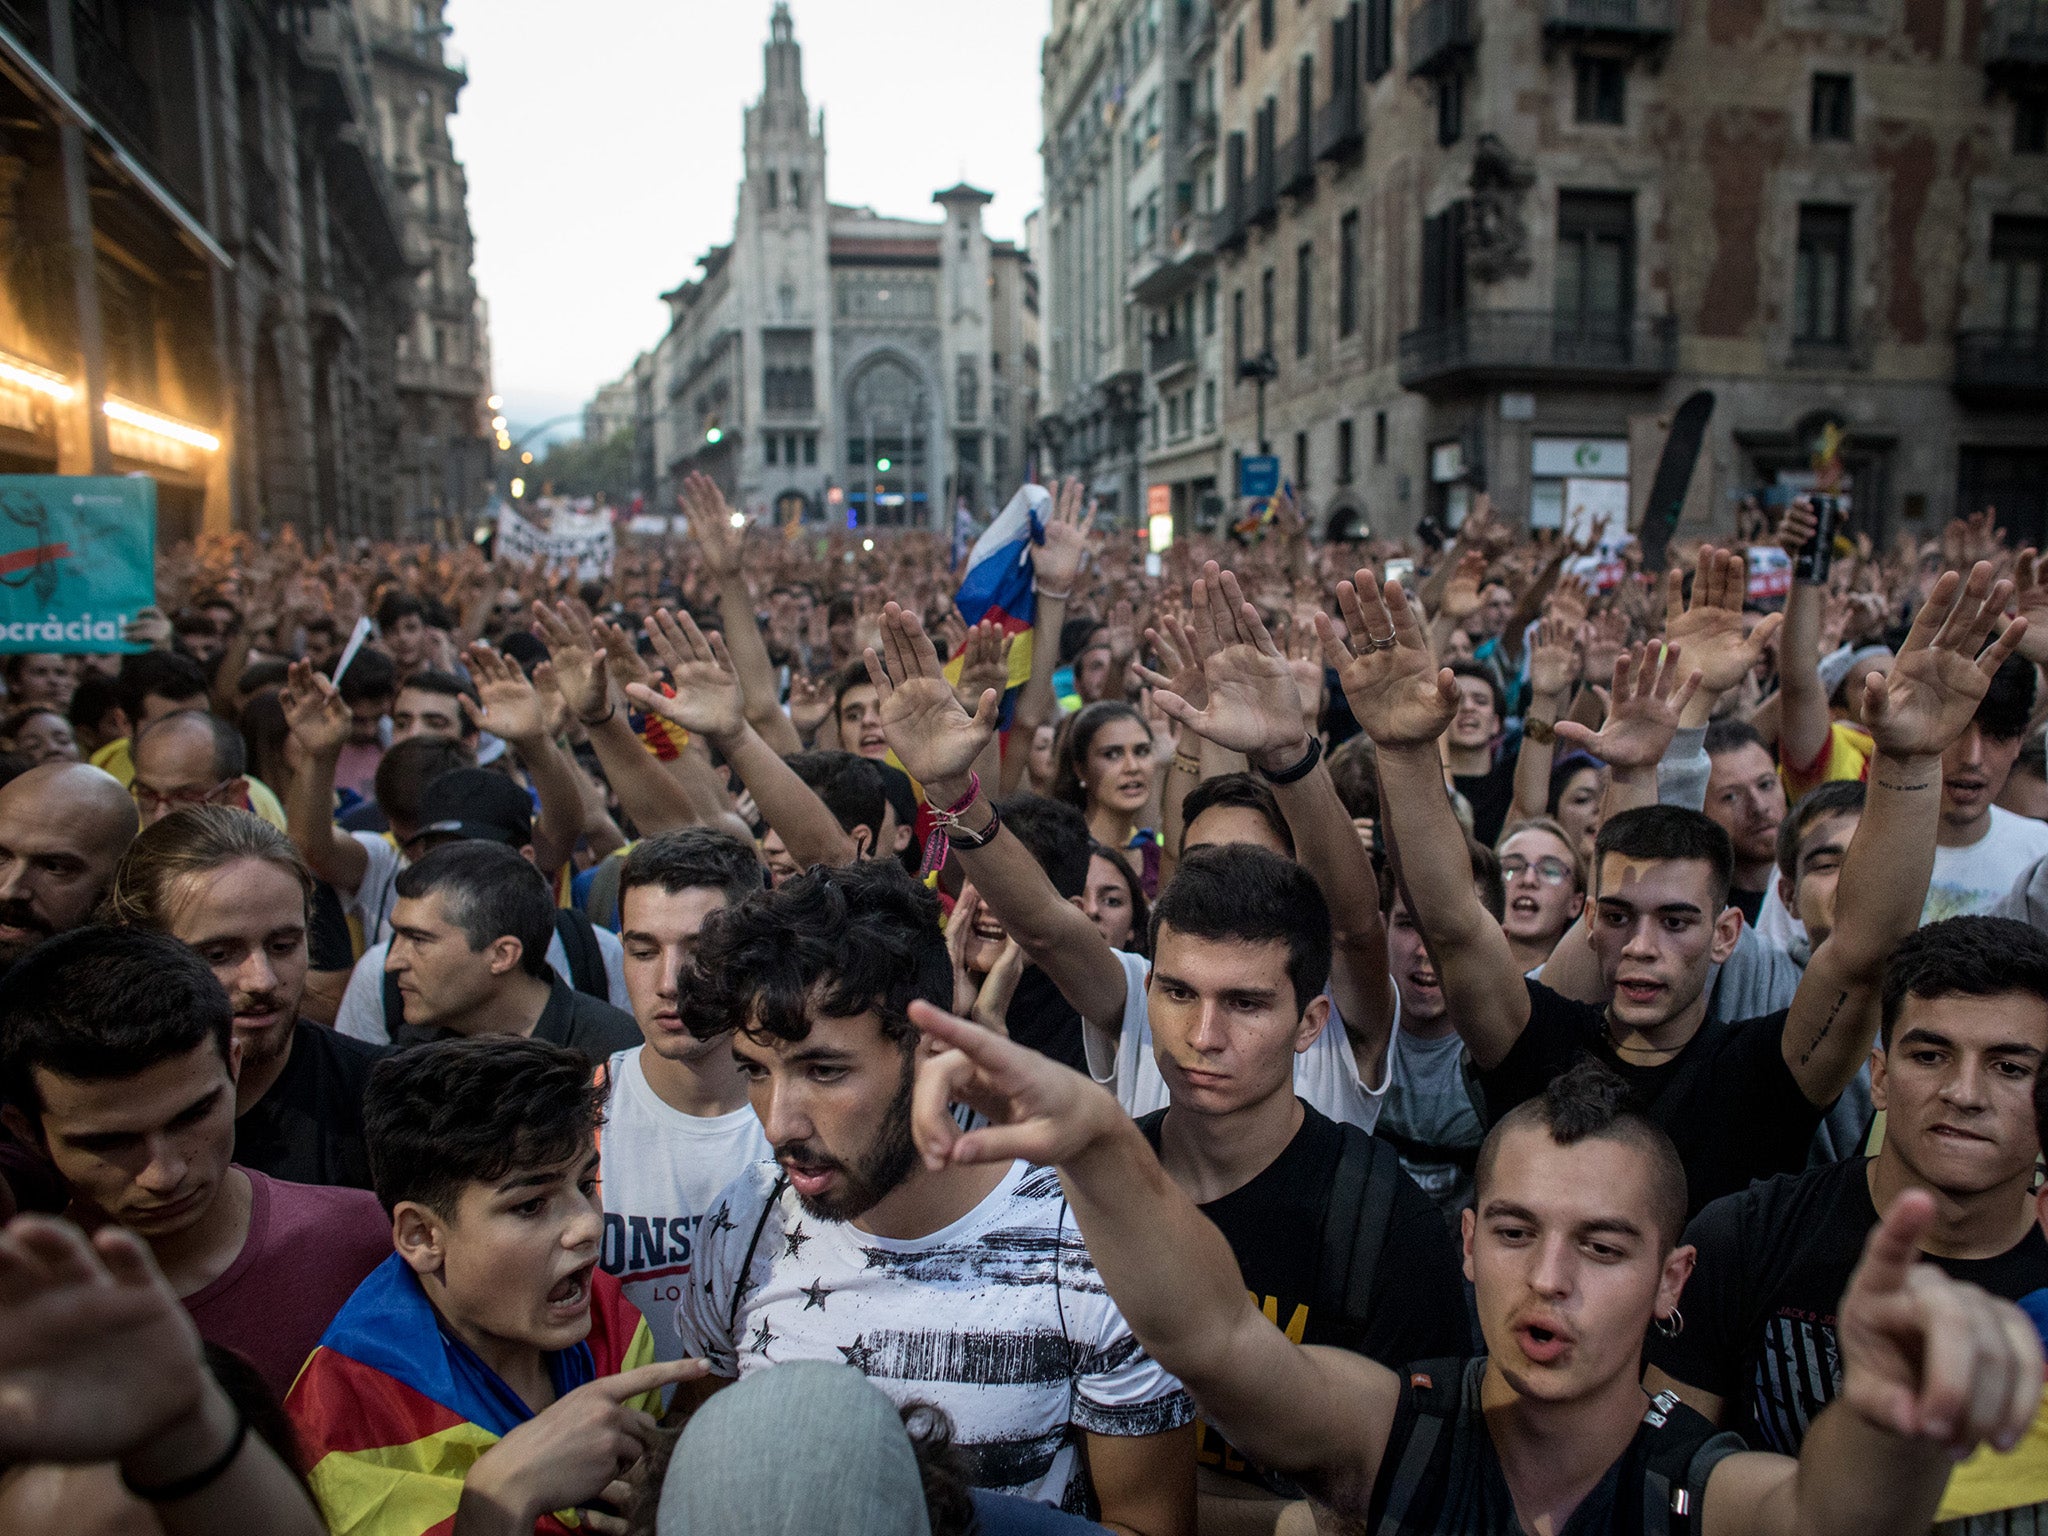 Thousands chant slogans as they gather outside the General Direction of the National Police of Spain building in Barcelona